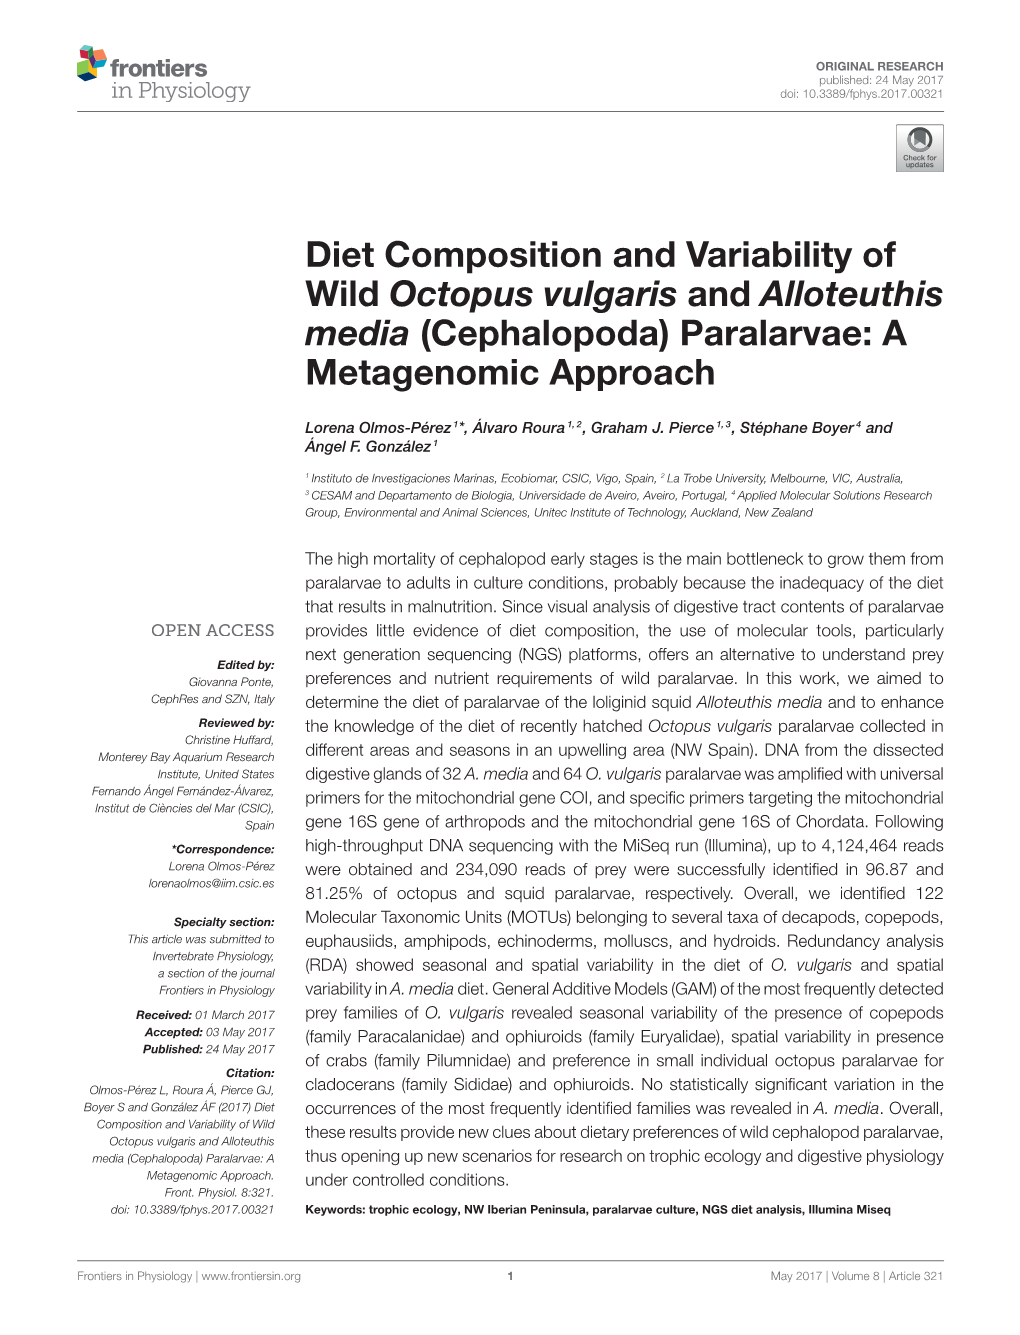 Diet Composition and Variability of Wild Octopus Vulgaris and Alloteuthis Media (Cephalopoda) Paralarvae: a Metagenomic Approach